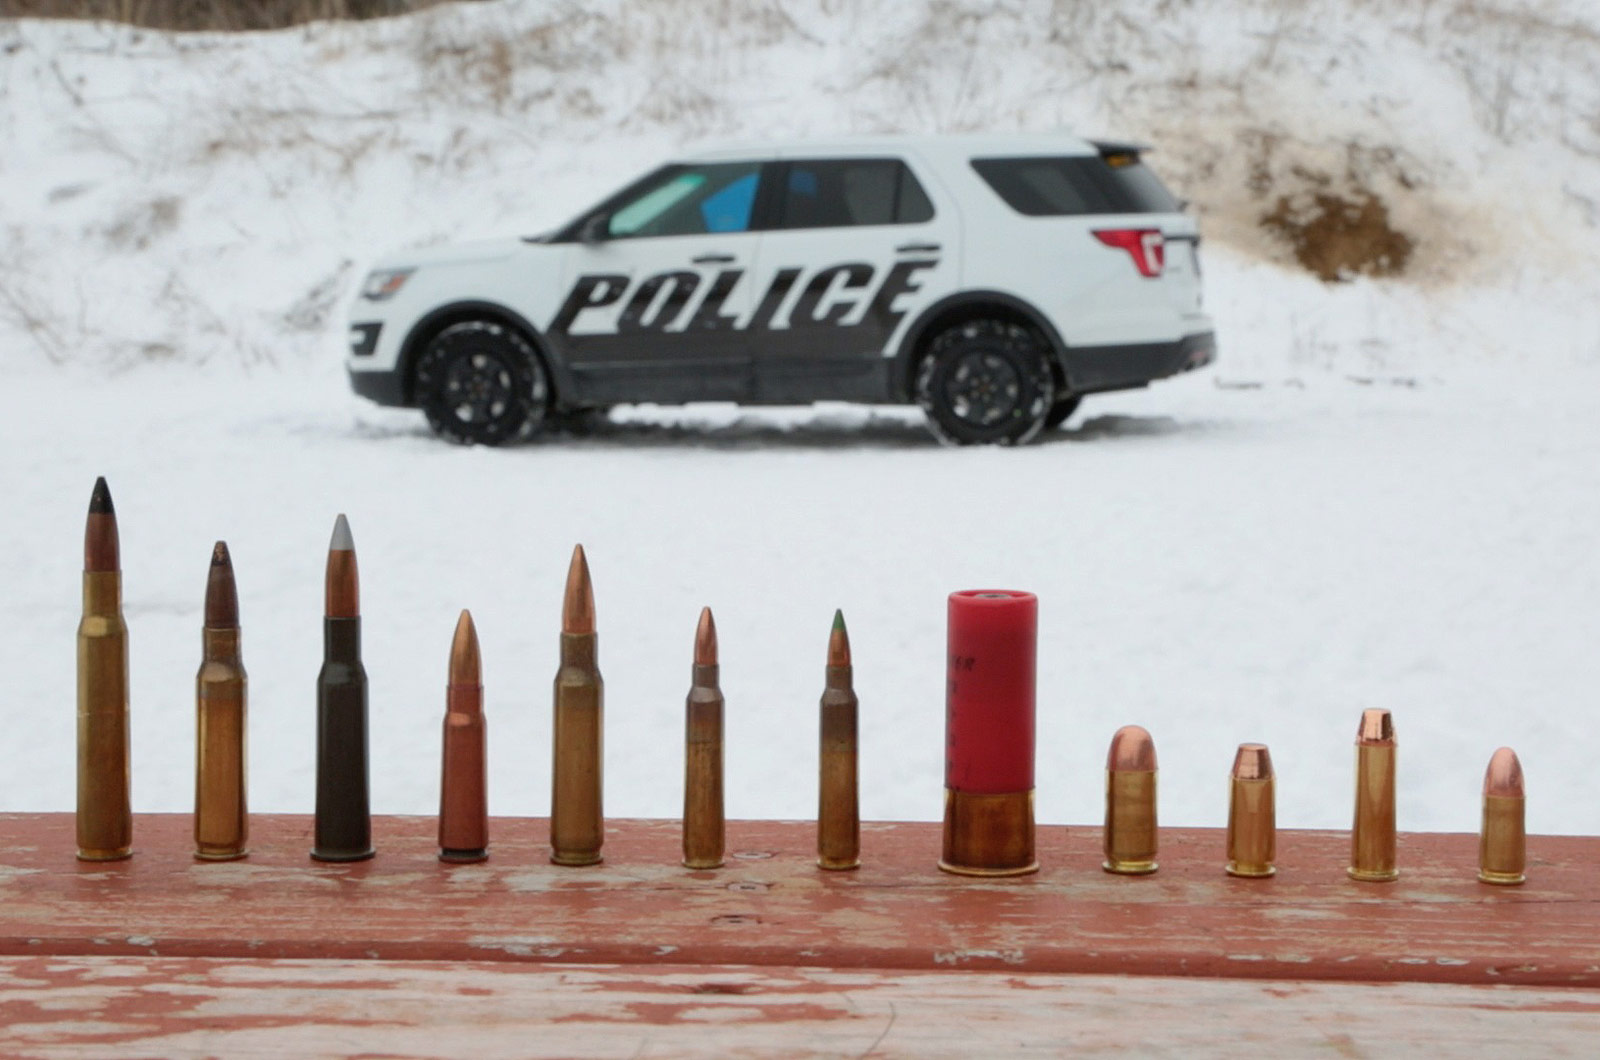 DEW PD Ballistic Door Panels: designed for police, law enforcement and civilian protection.